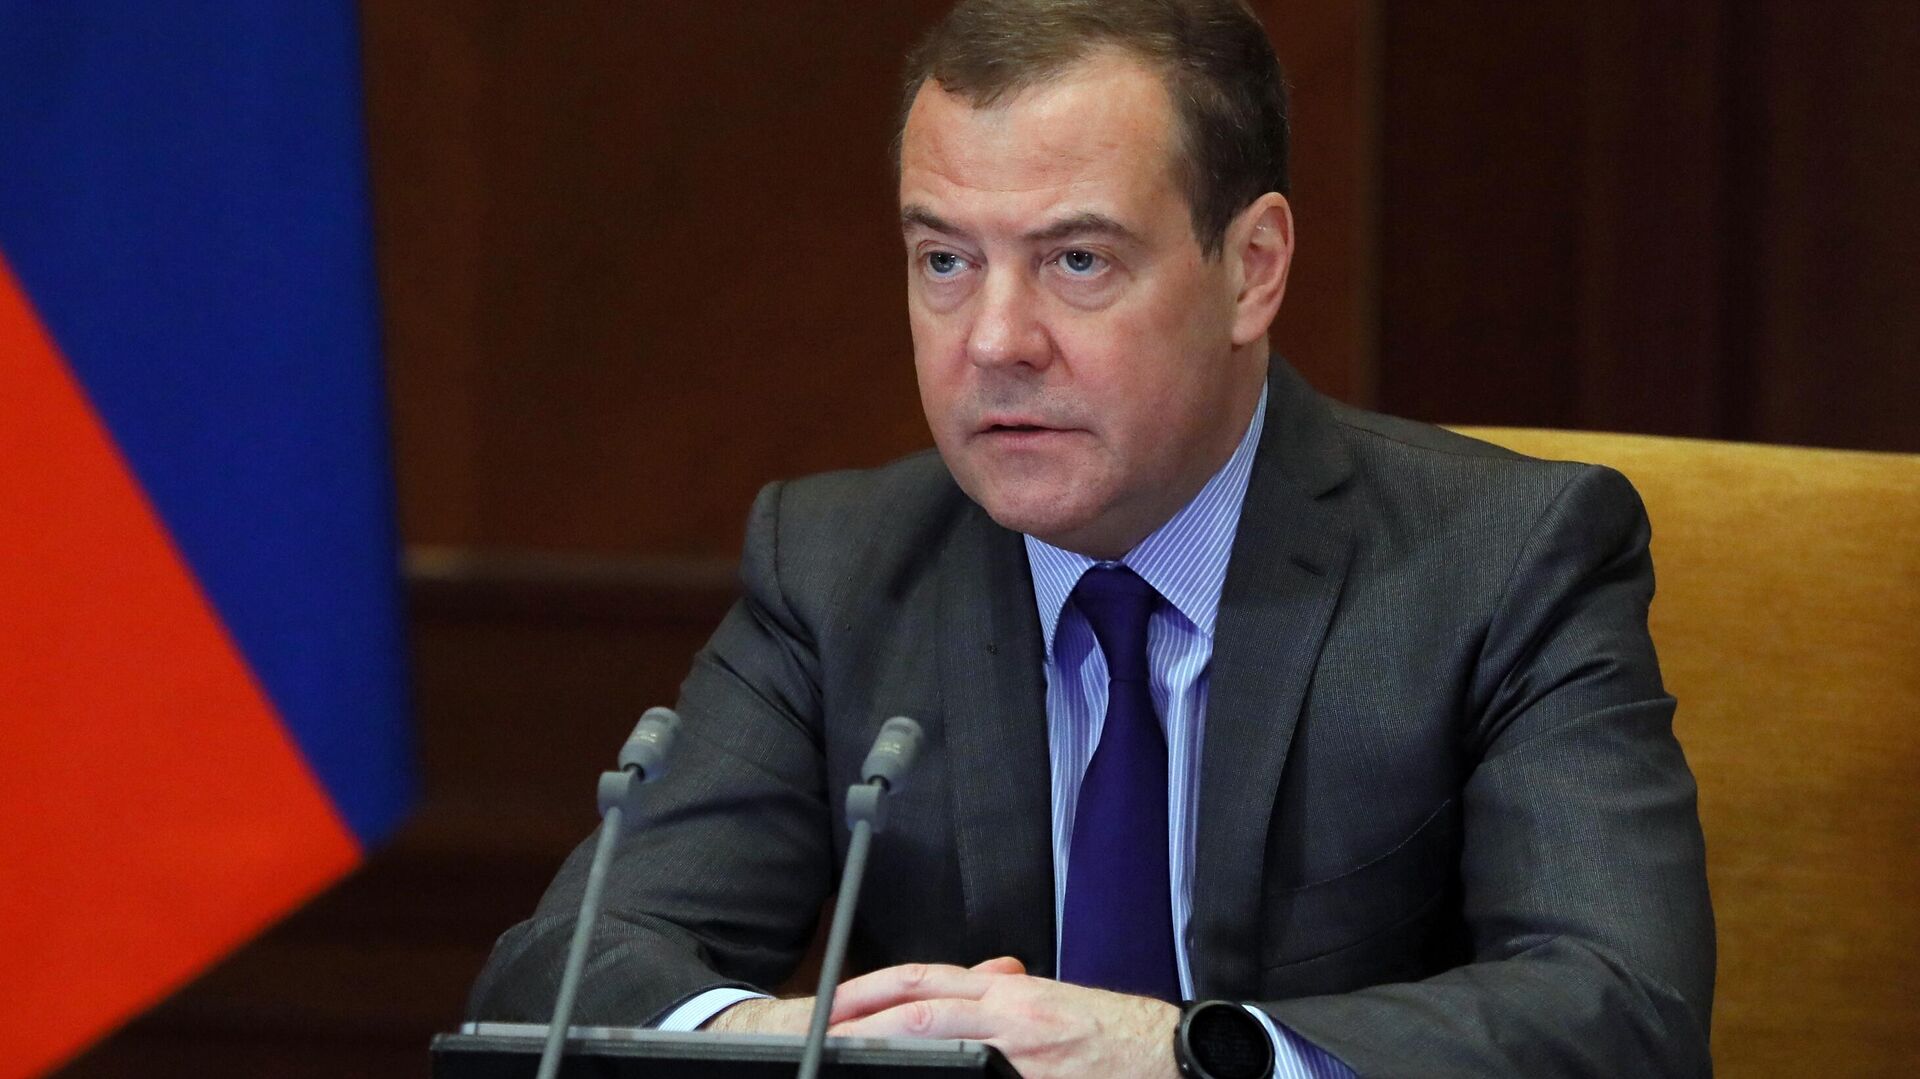 Dmitry Medvedev, former prime minister and president and deputy chairman of the Russian Security Council. February 15, 2022. - Sputnik International, 1920, 26.03.2022